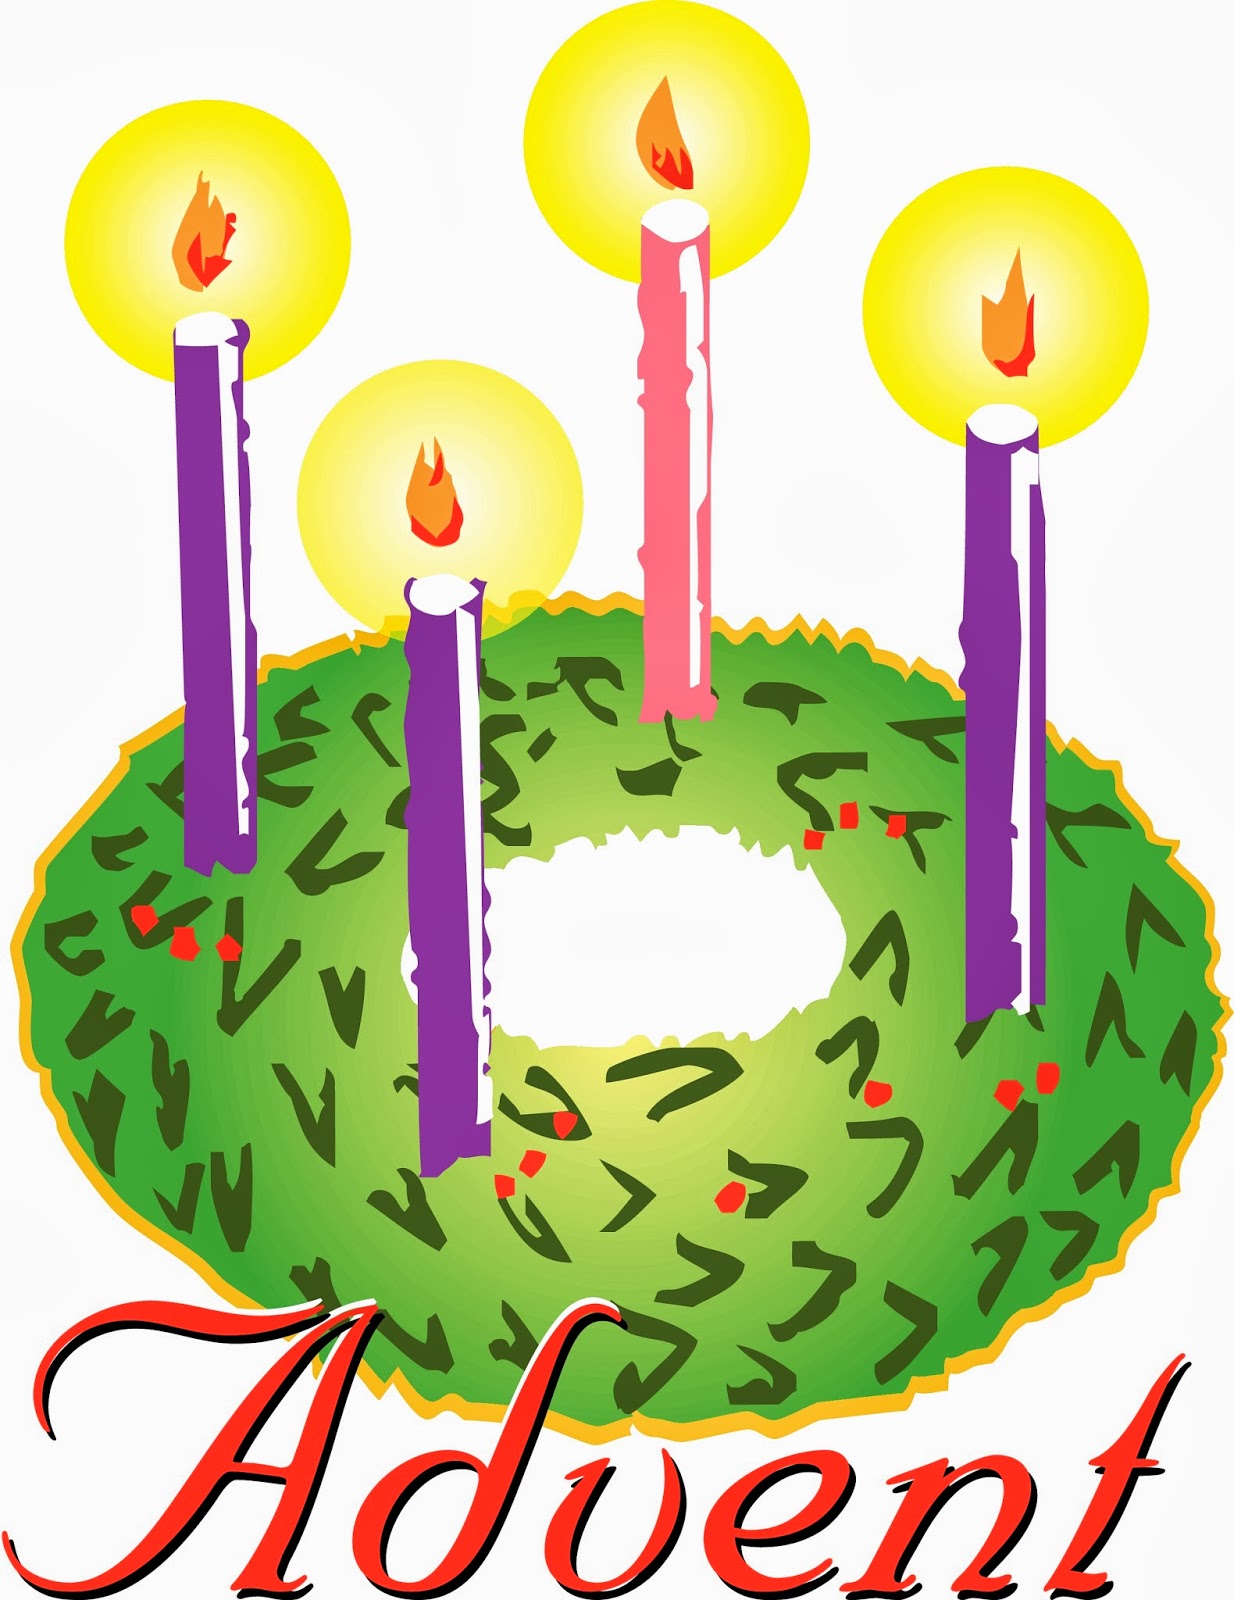 Advent Wreath One Candle Lit Clipart Bw.